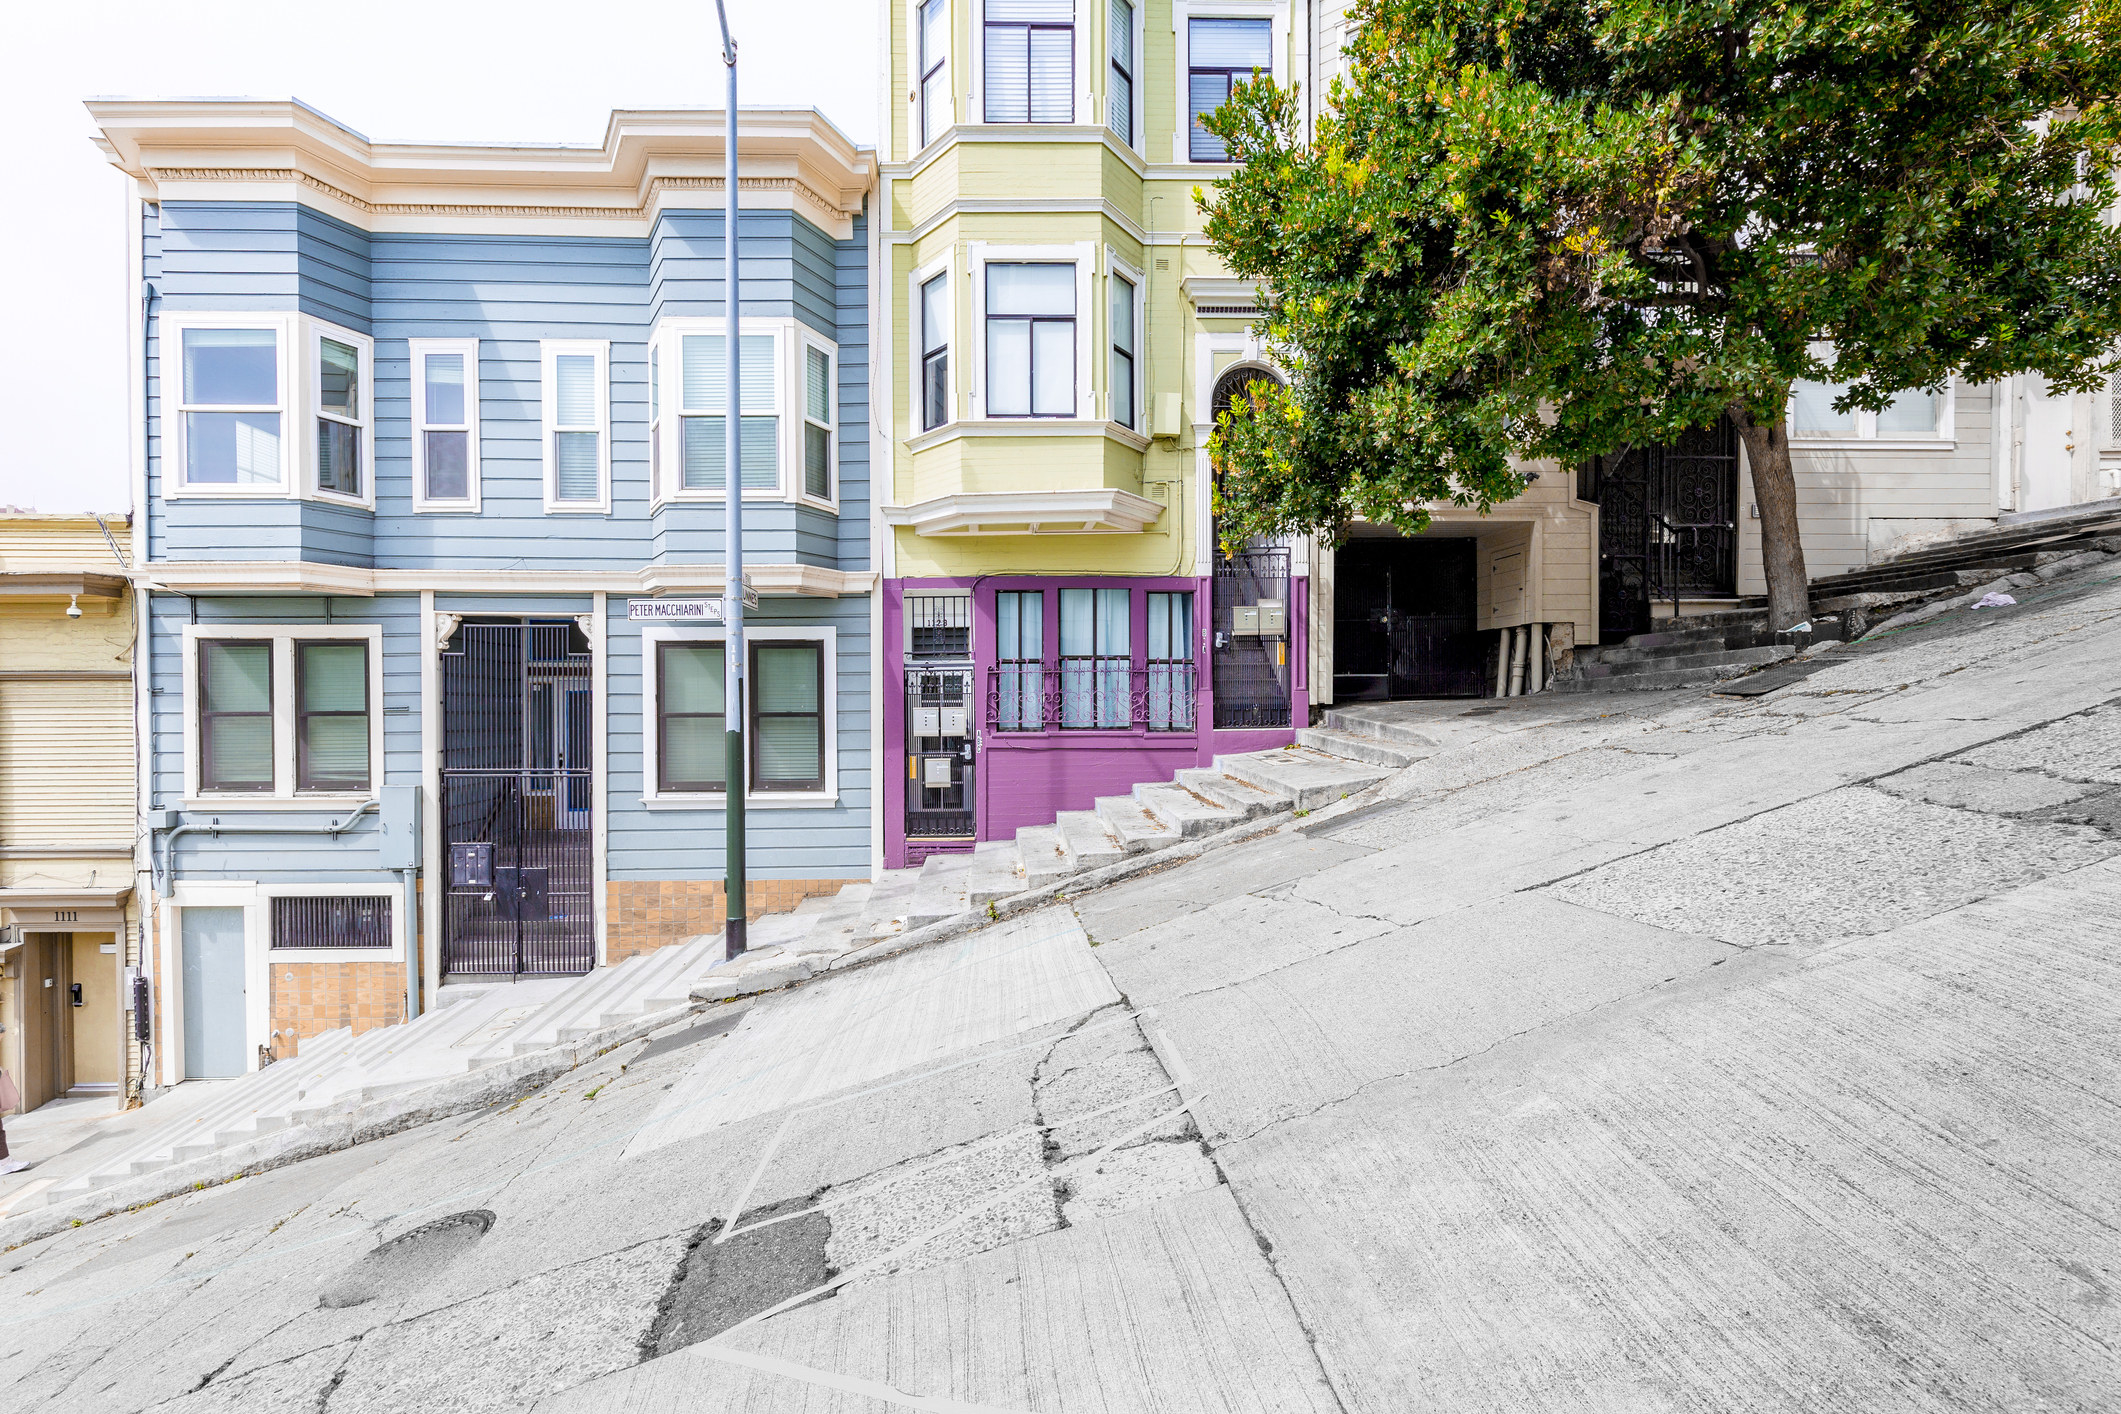 Buildings on a hilly street in San Francisco.